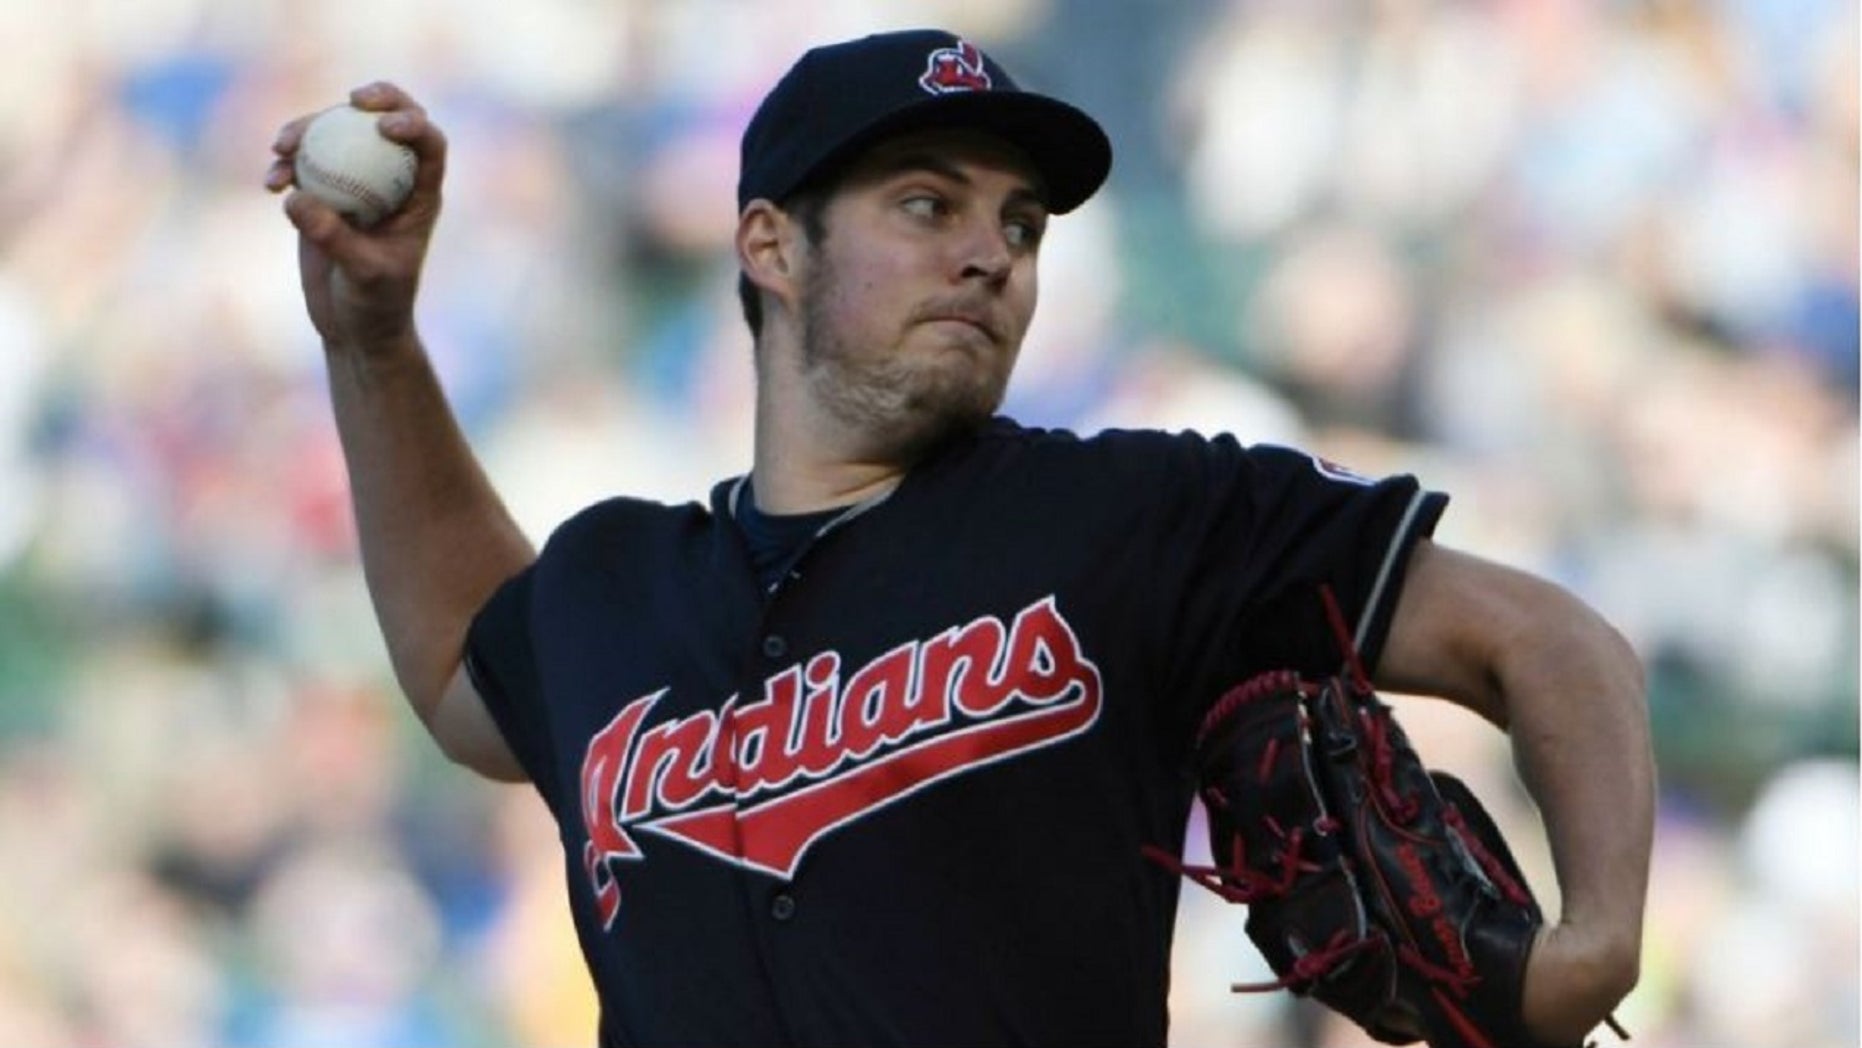 Texas college student reports Indian pitcher Trevor Bauer for alleged harassment over Twitter: report